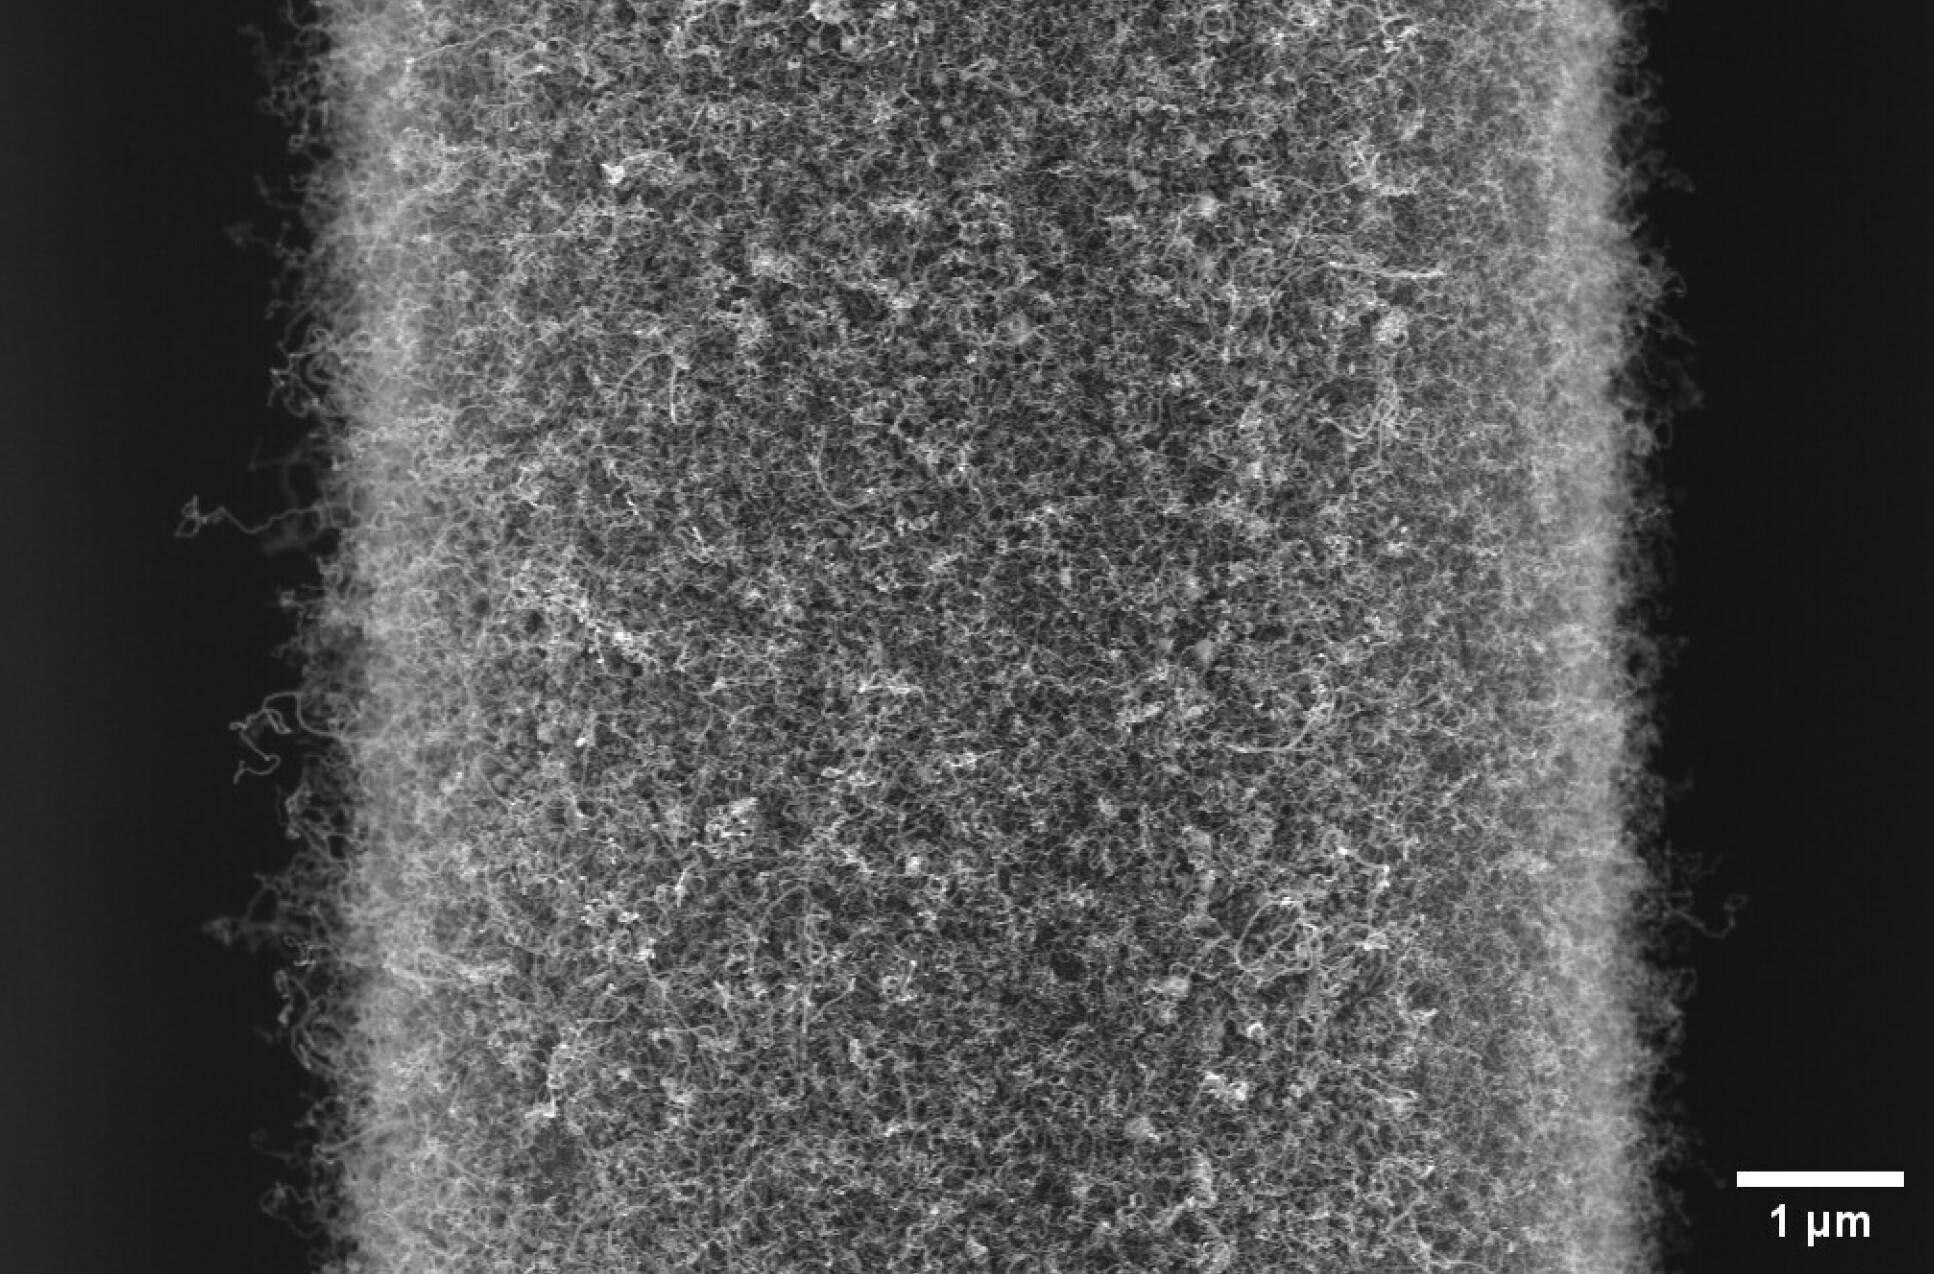 The image showcases "Fuzzy" carbon fibre, an advanced material engineered by directly synthesizing carbon nanotubes (10 nm diameter) onto carbon fibres.